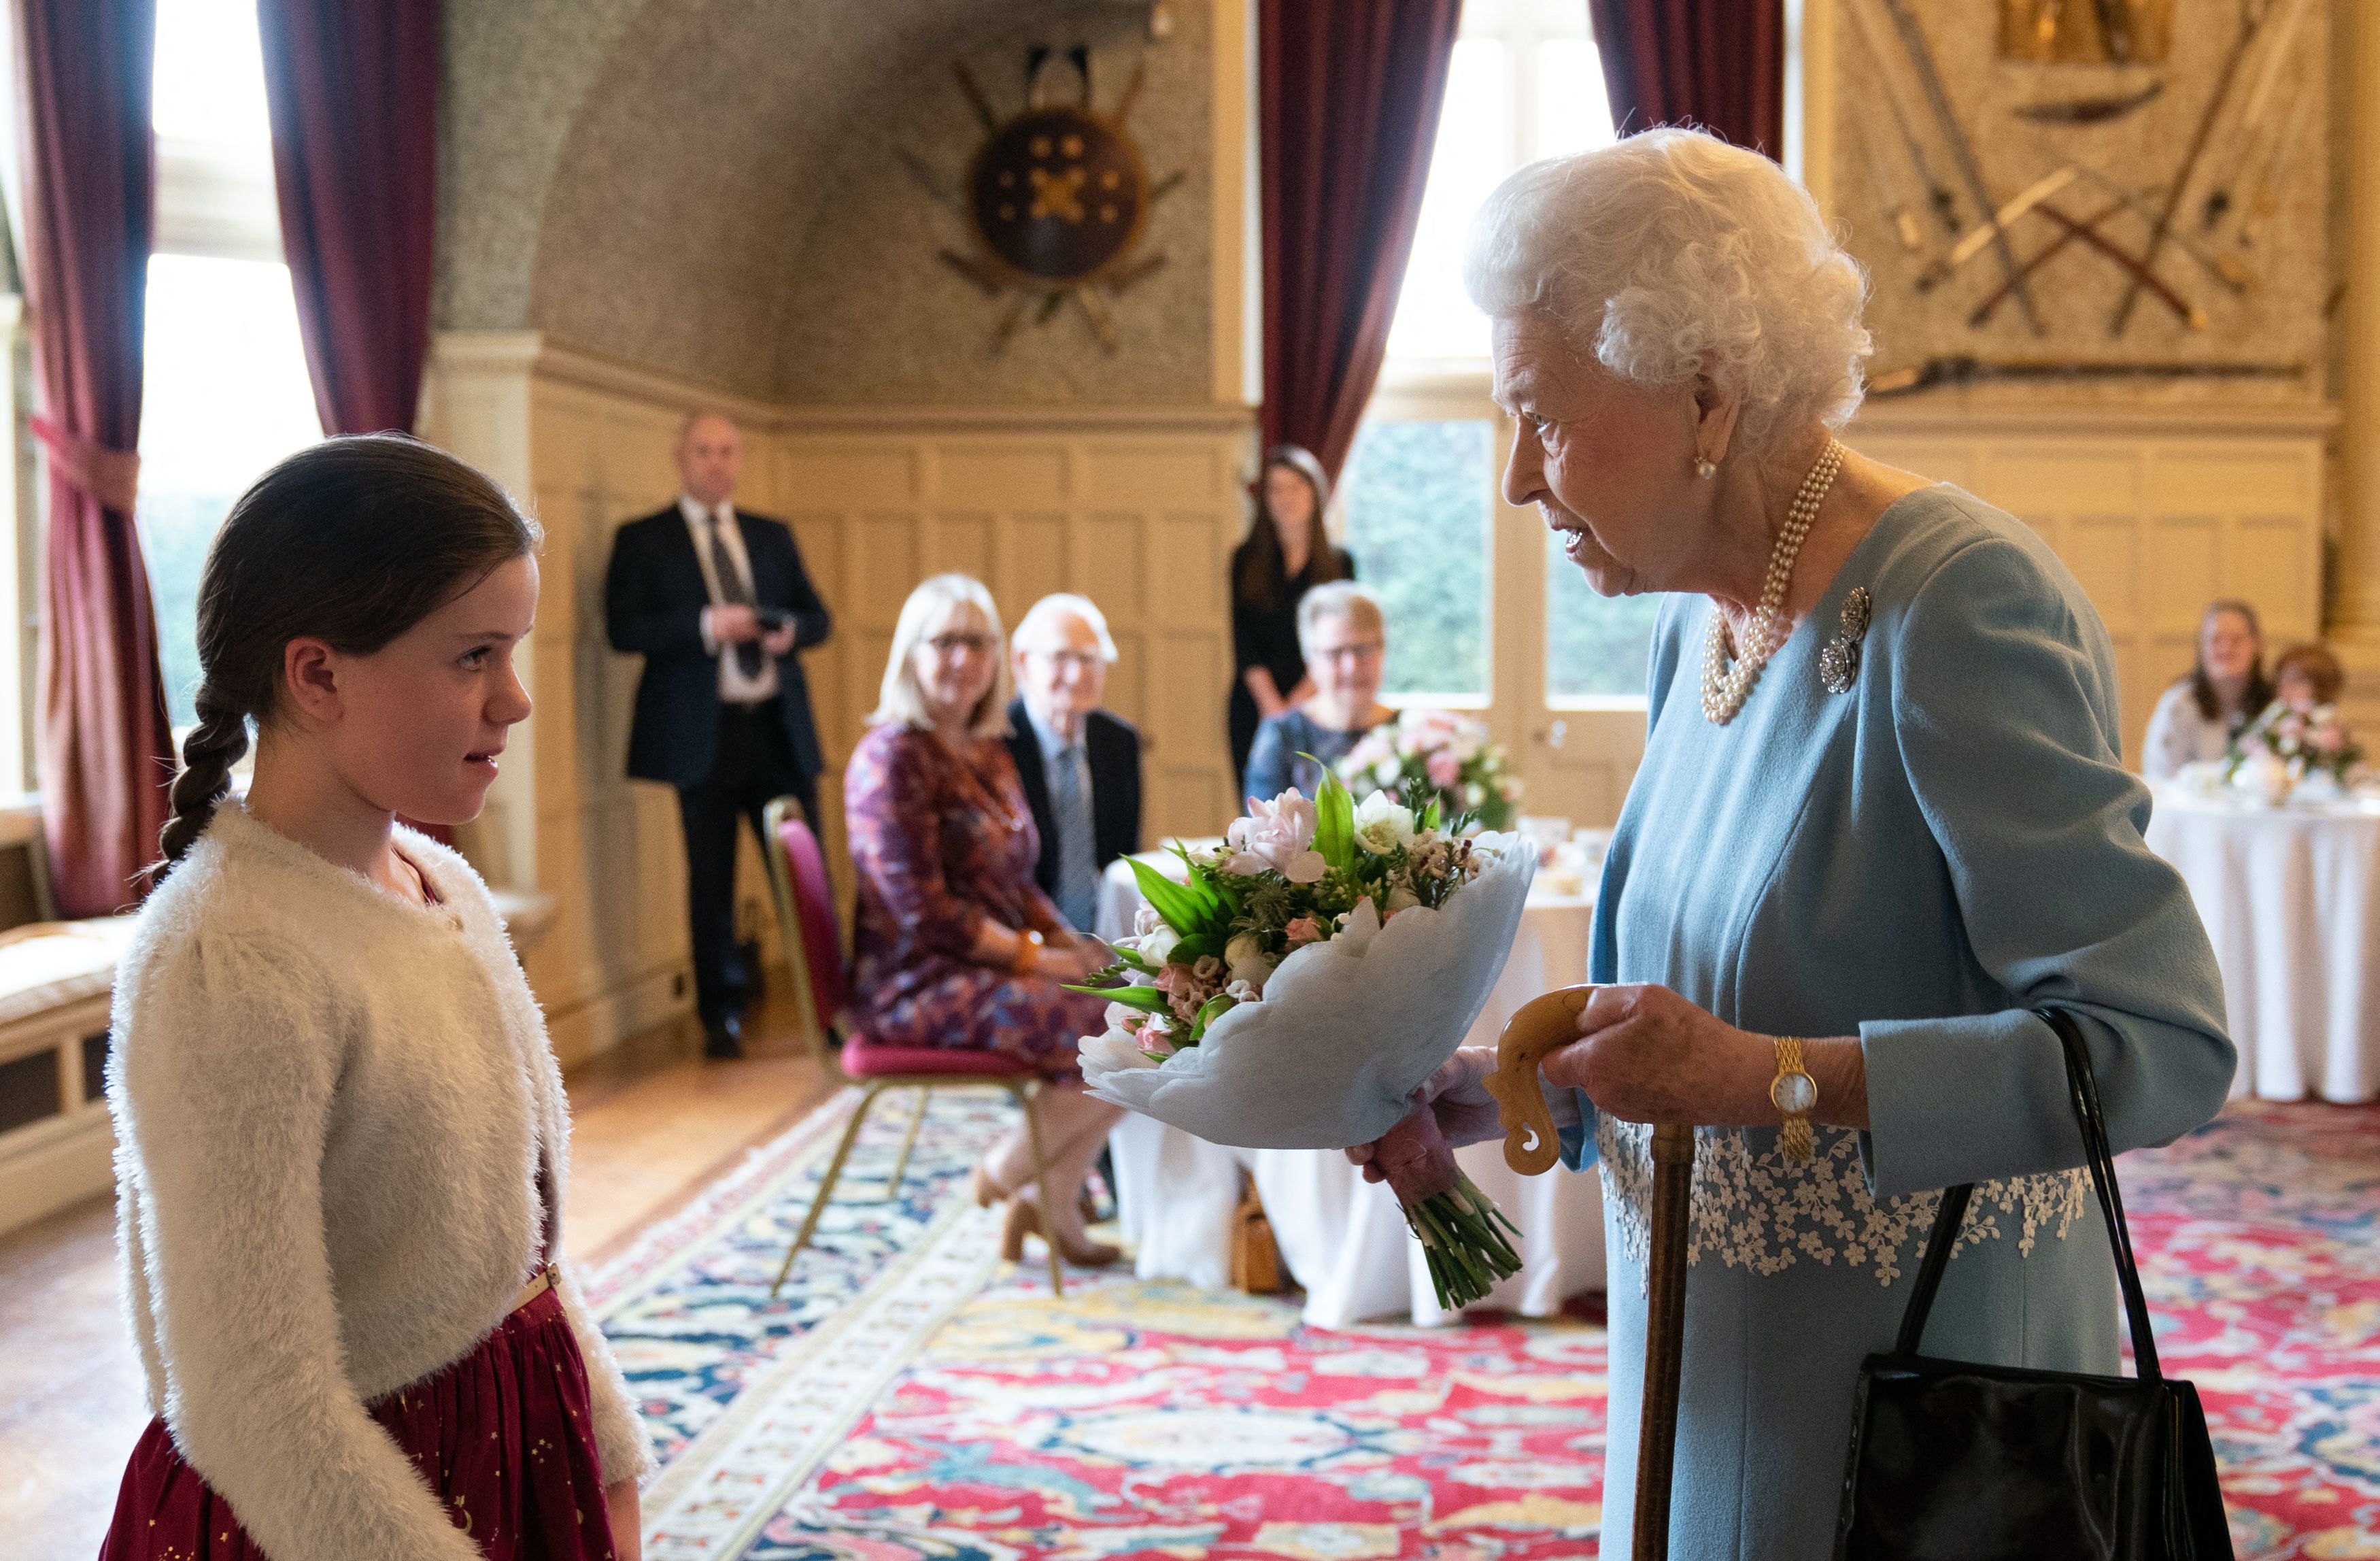 The queen receives a bouquet from a girl 